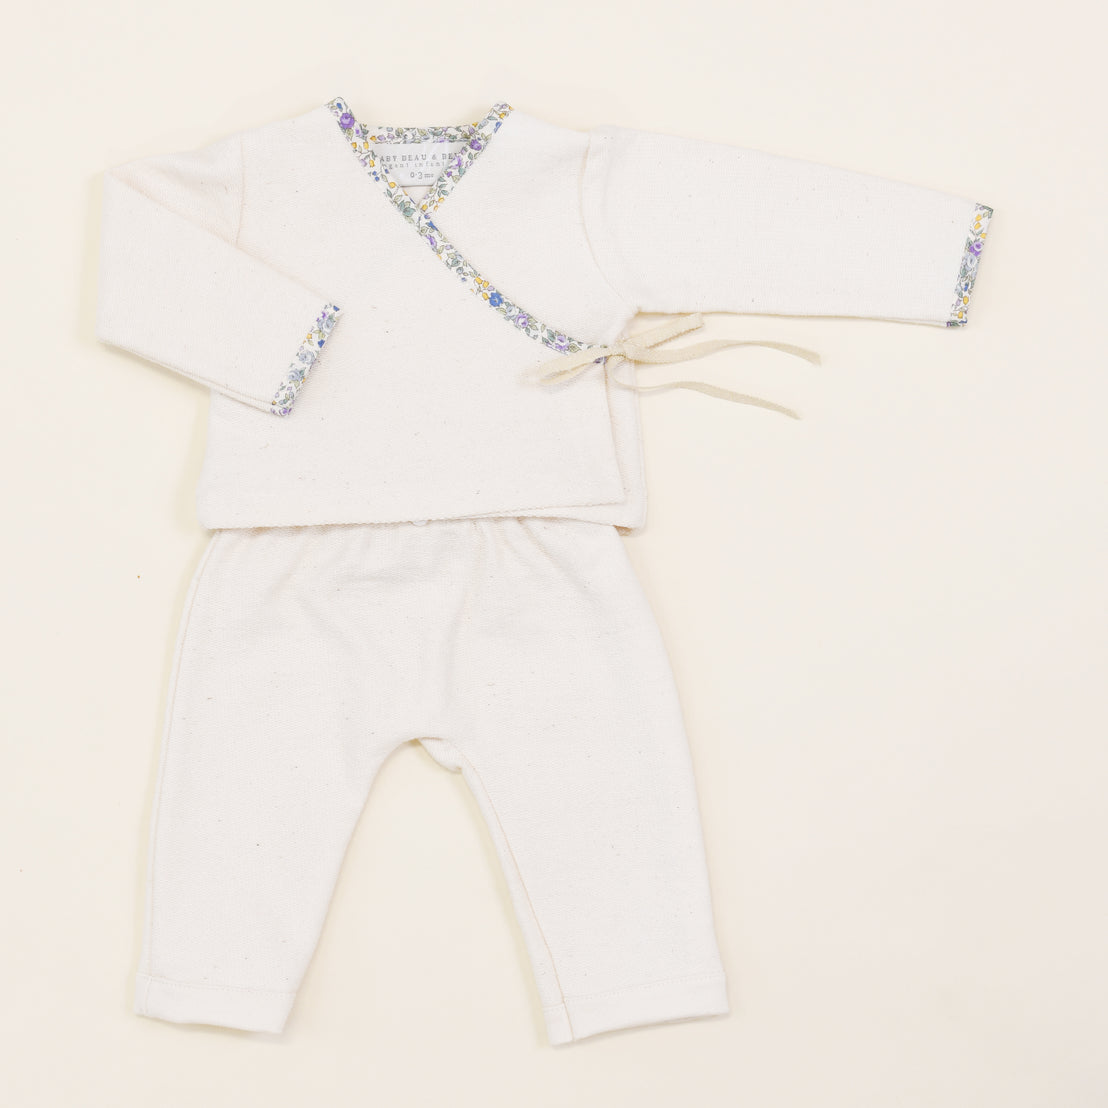 An upscale, Petite Fleur Wrap Top & Pants baby outfit featuring a kimono-style top with floral trim and matching pants, displayed on a plain light background.